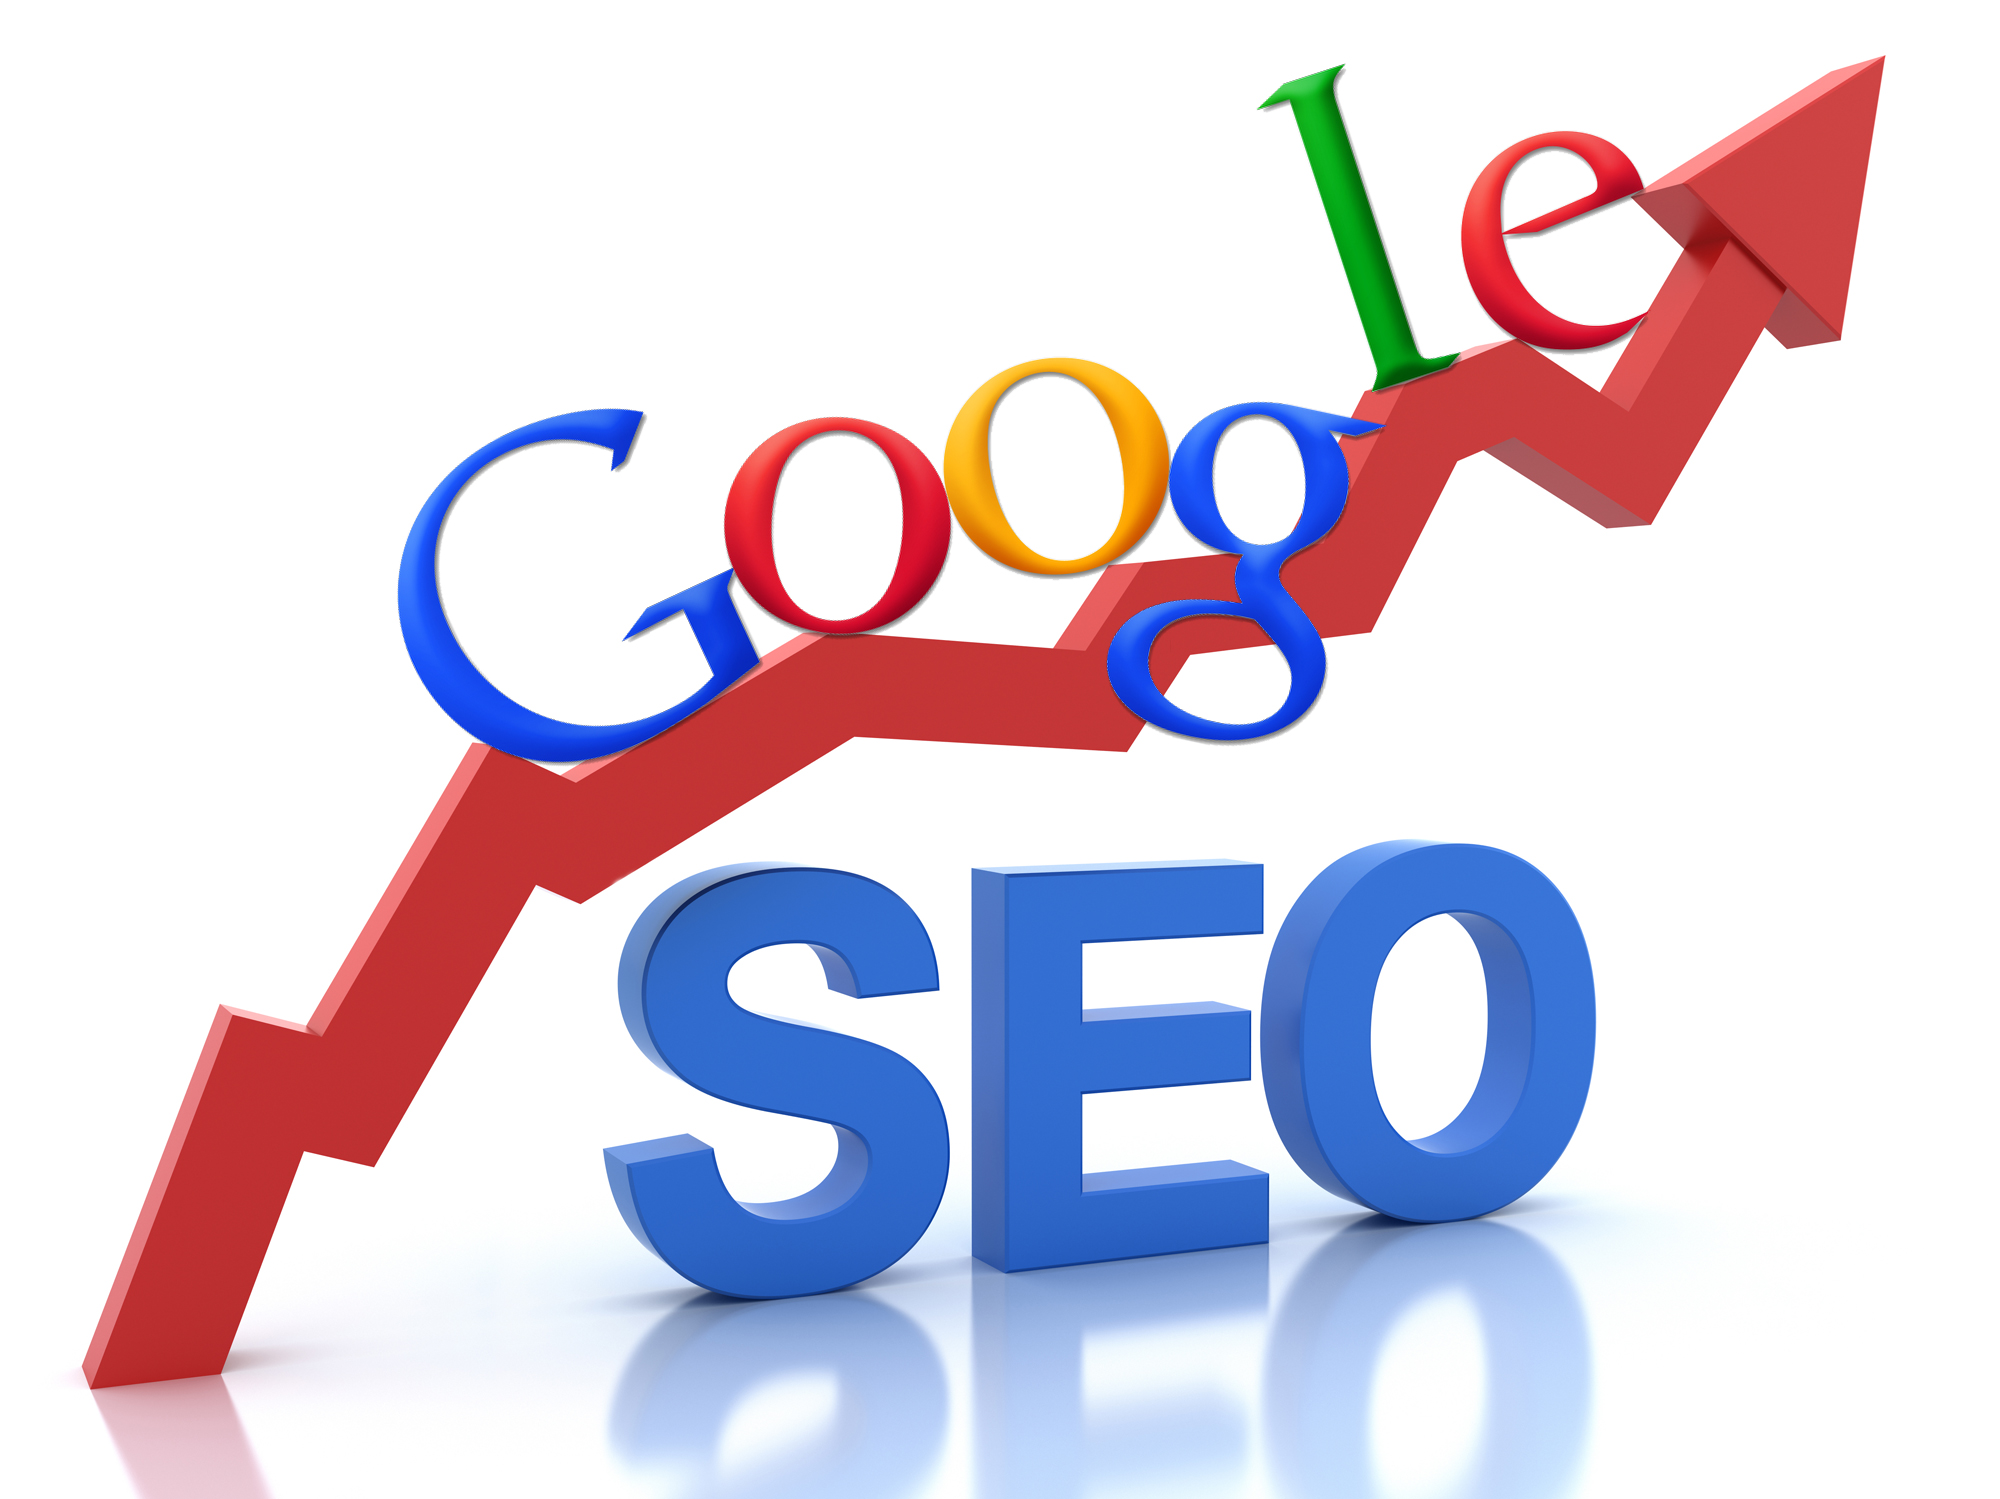 Improve your Google search results today